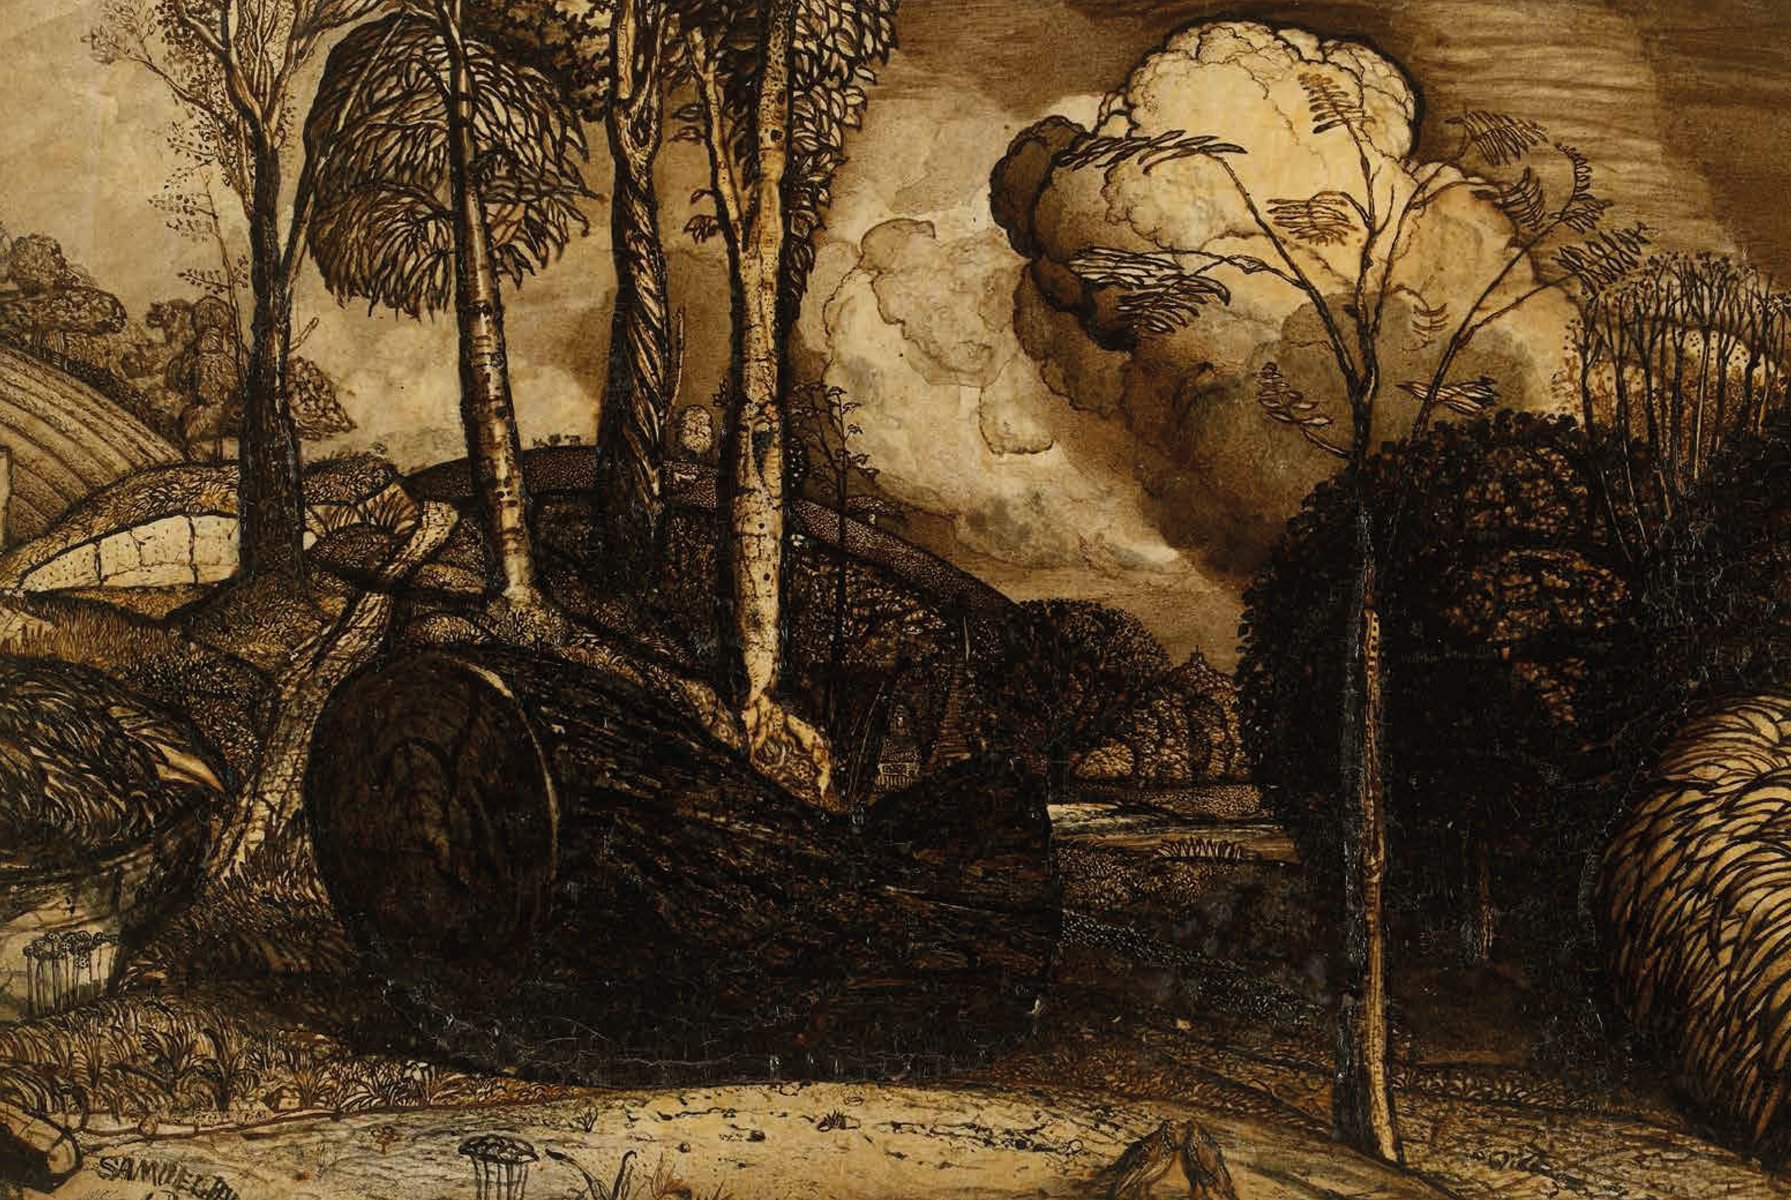 The valley thick with corn sepia painting by Samuel Palmer, The Works of Samuel Palmer in white font above.